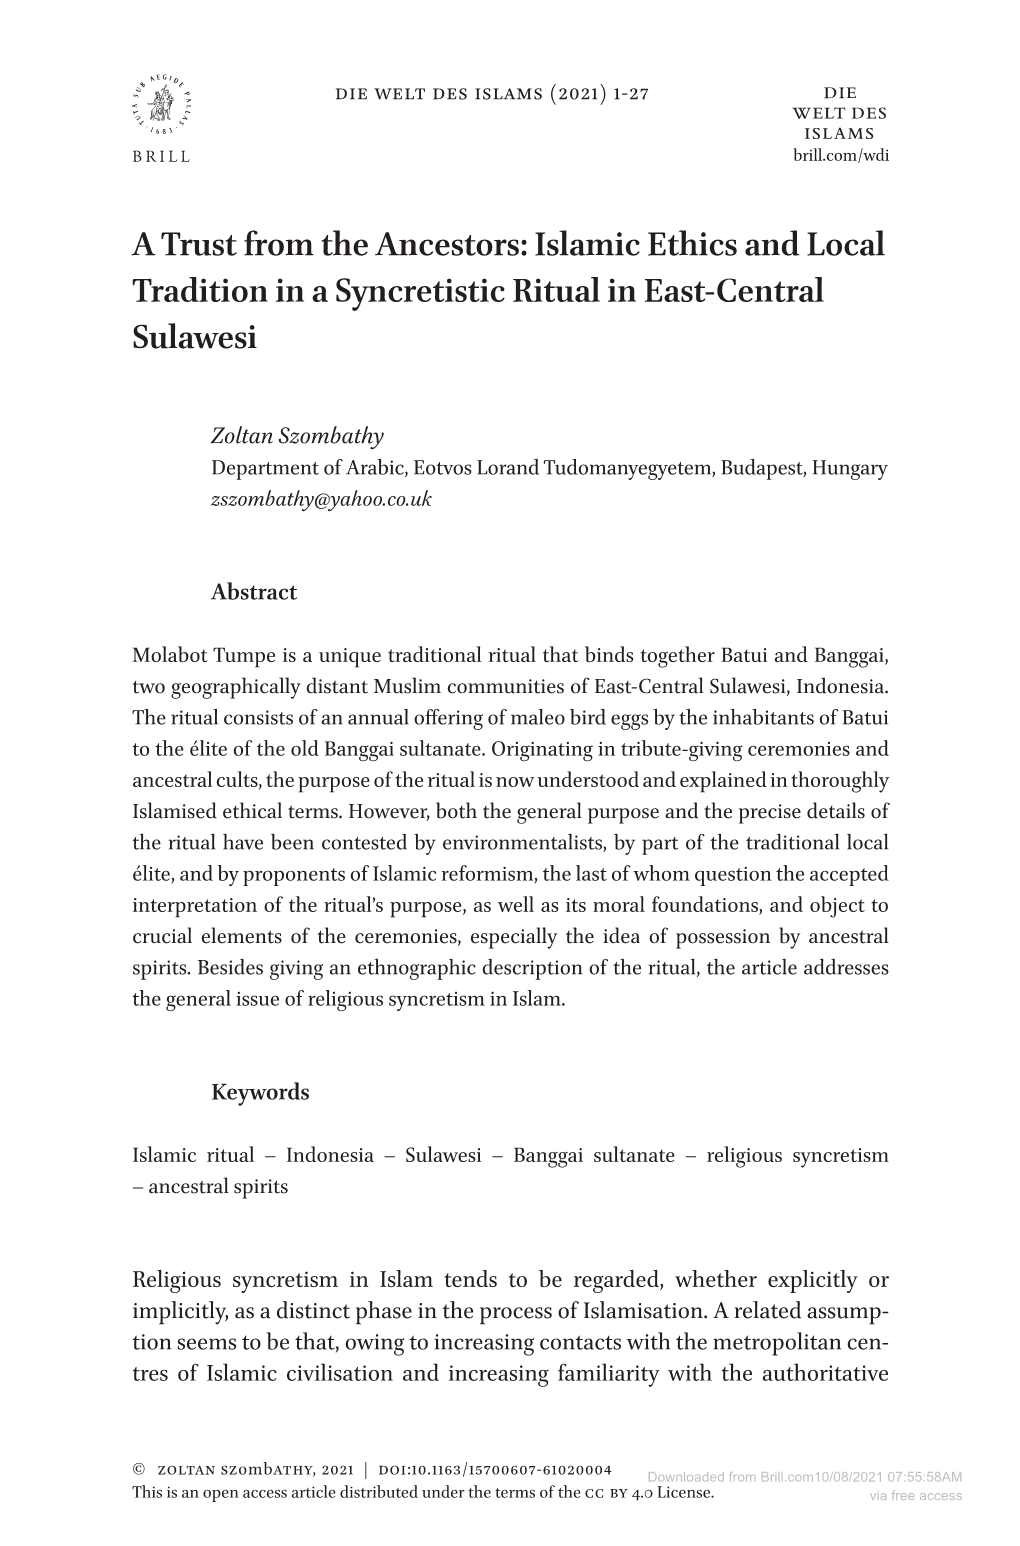 A Trust from the Ancestors: Islamic Ethics and Local Tradition in a Syncretistic Ritual in East-Central Sulawesi